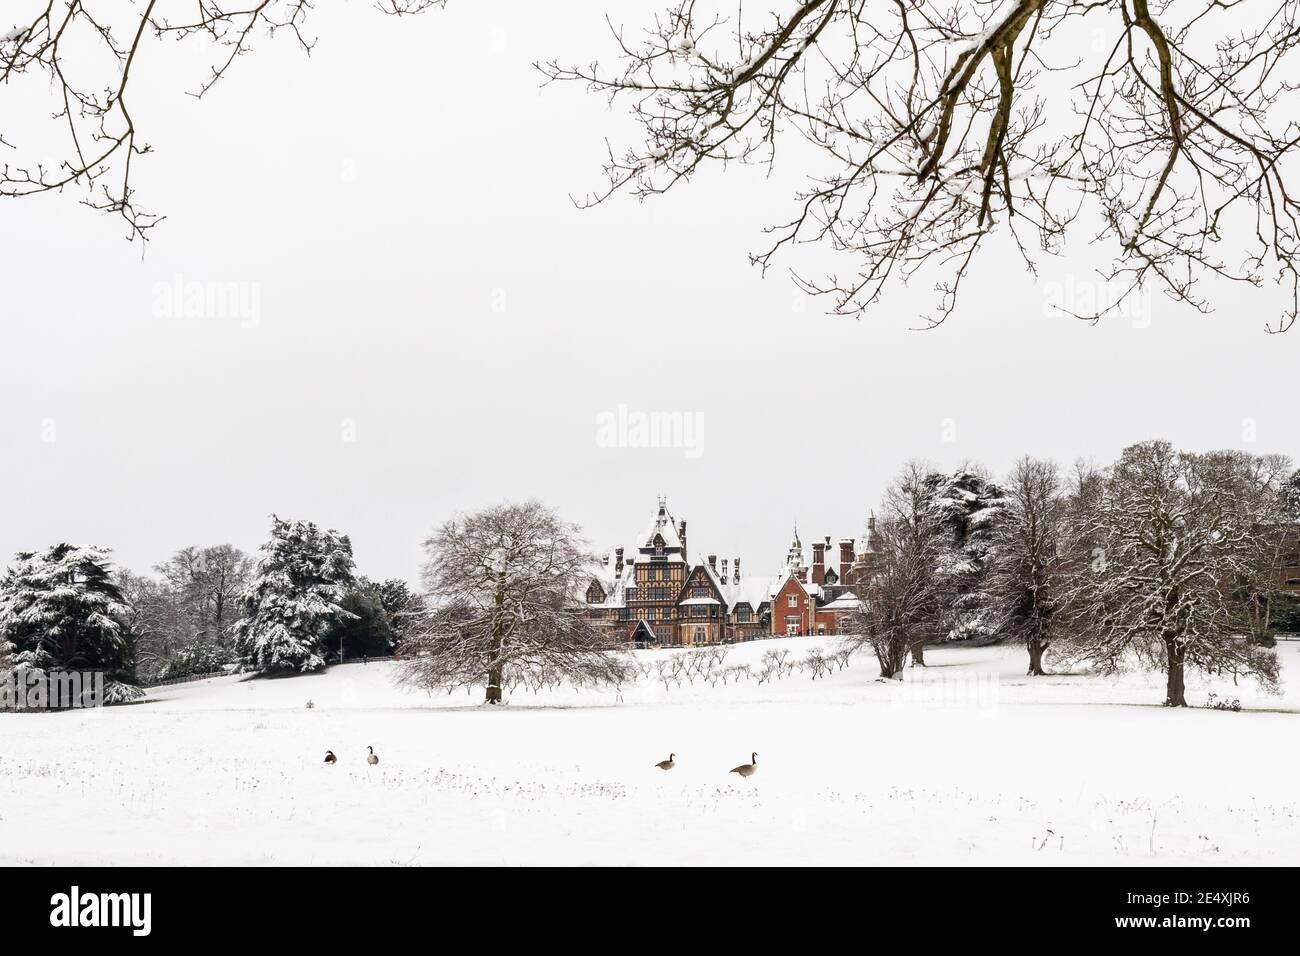 Farnborough Hill, a Roman Catholic independent girls day school (English public school) in January or winter with snow, Hampshire, UK Stock Photo